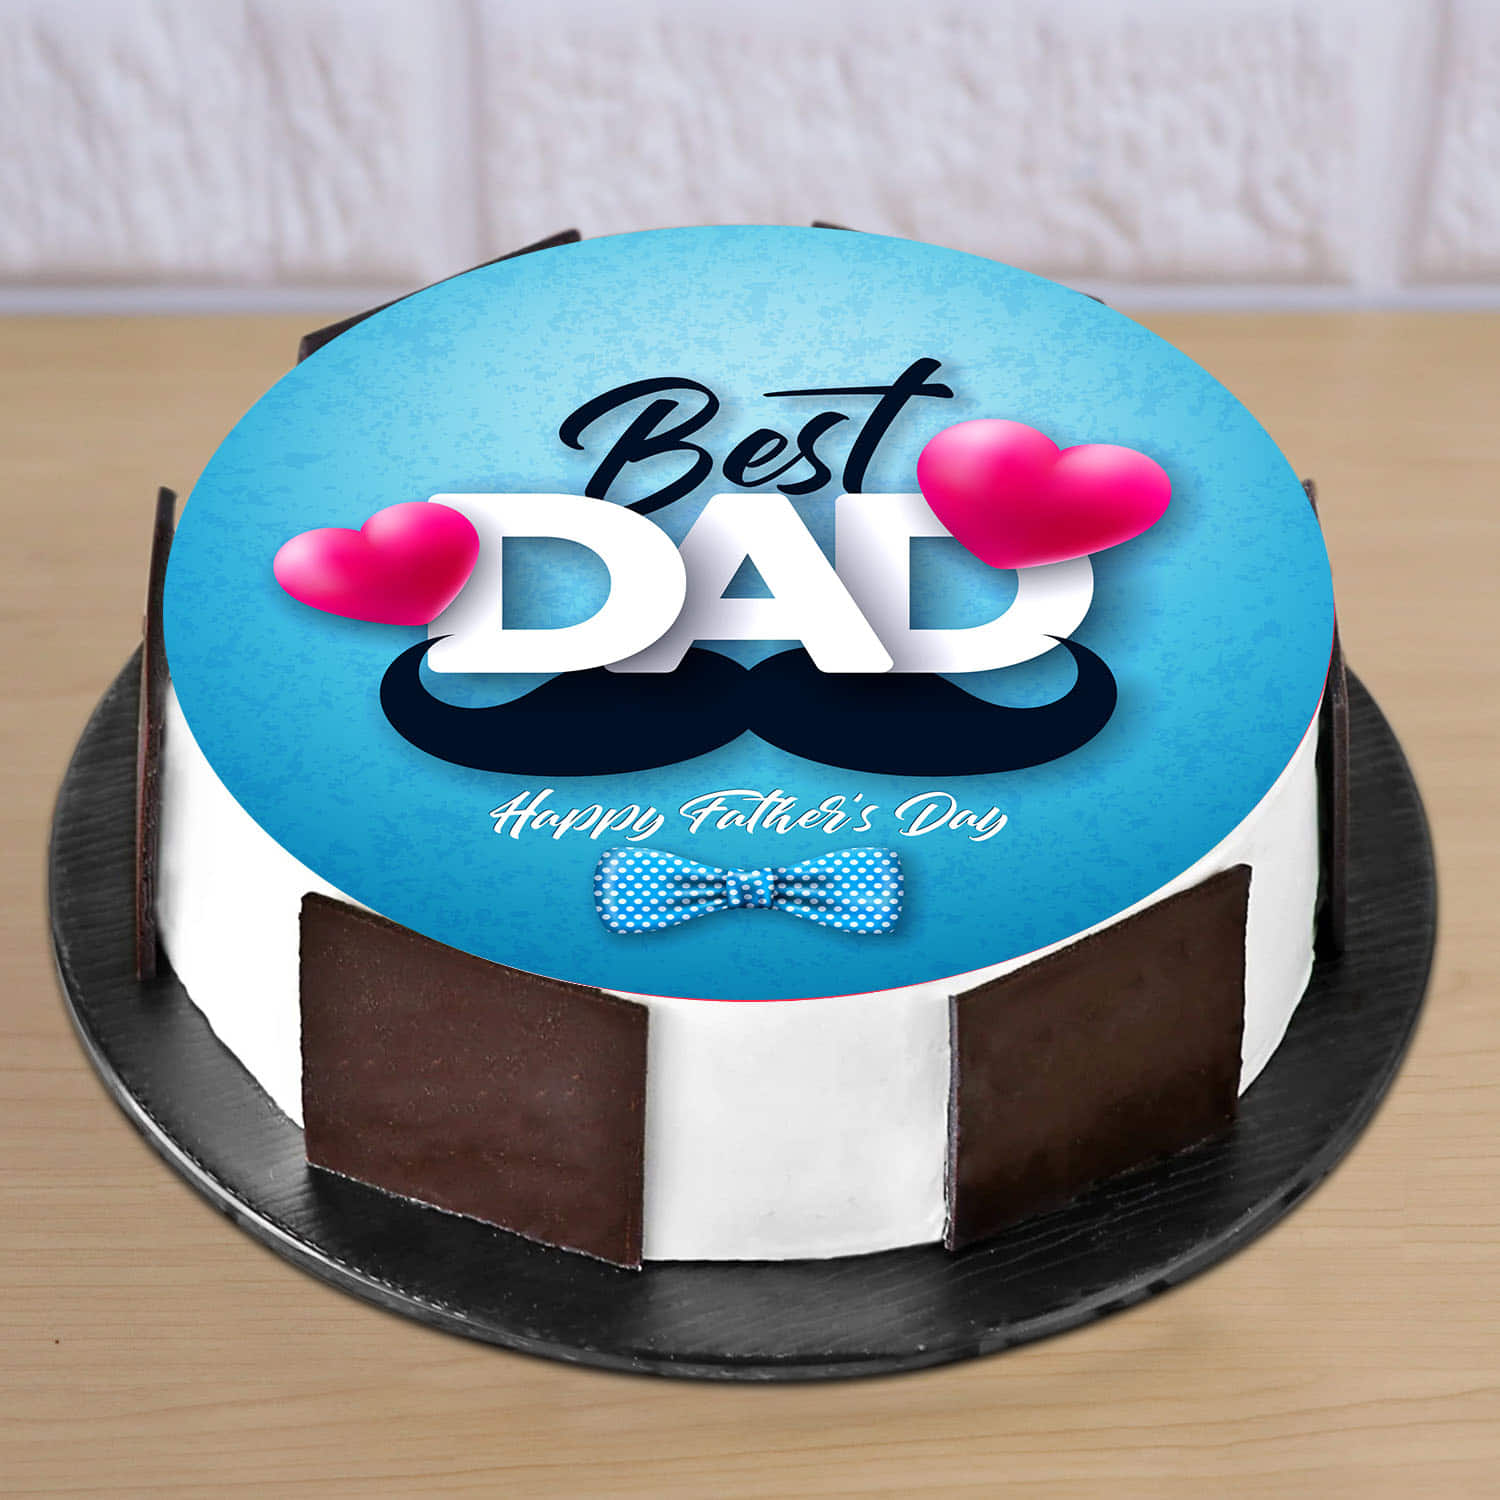 Father's Day Cake Lahore - Send Father's Day Cake to Pakistan